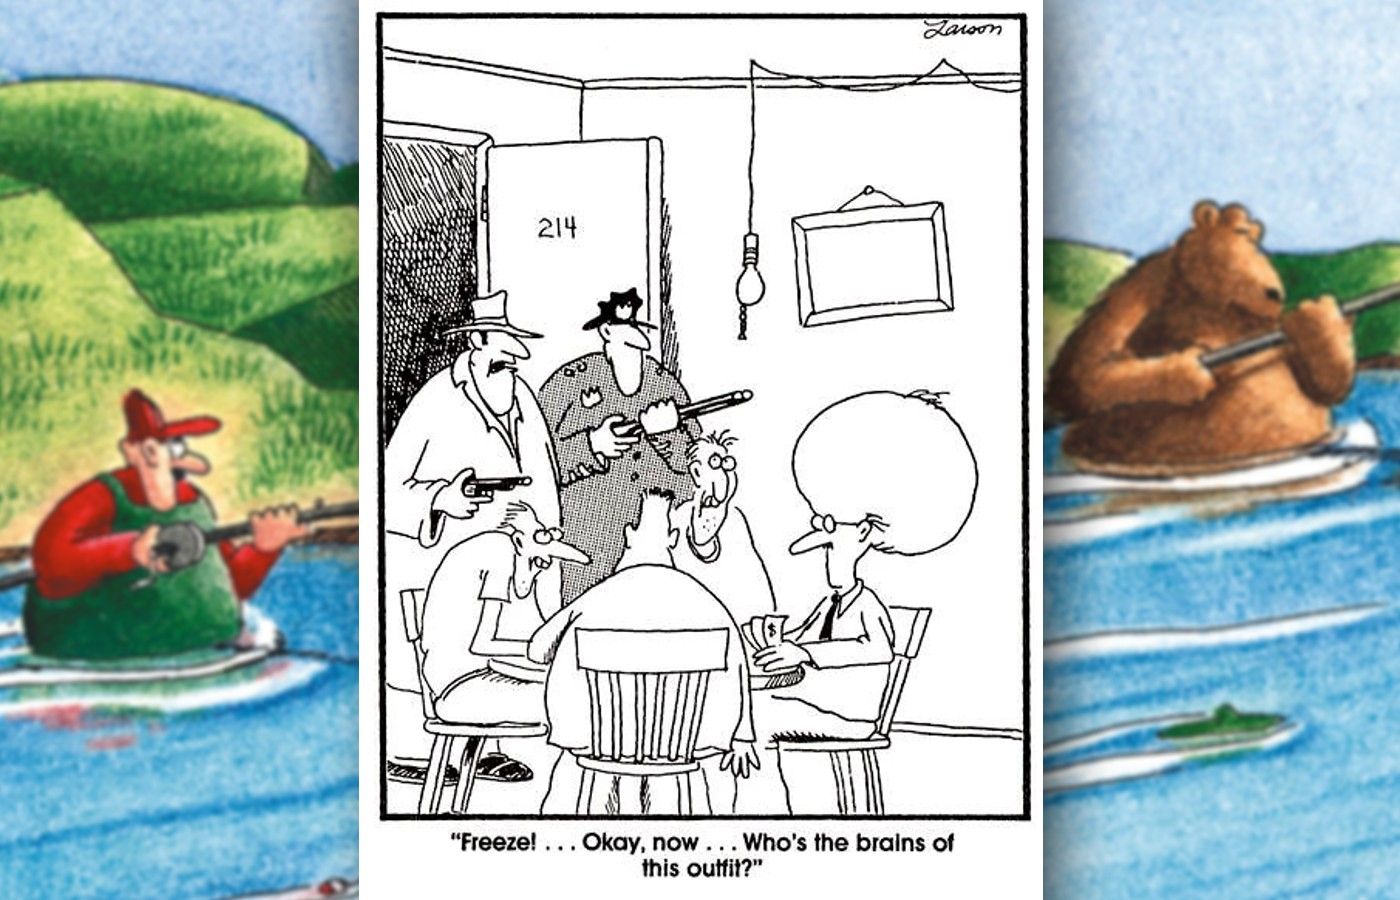 far side comic playing on the idiom ' brains of the outfit'